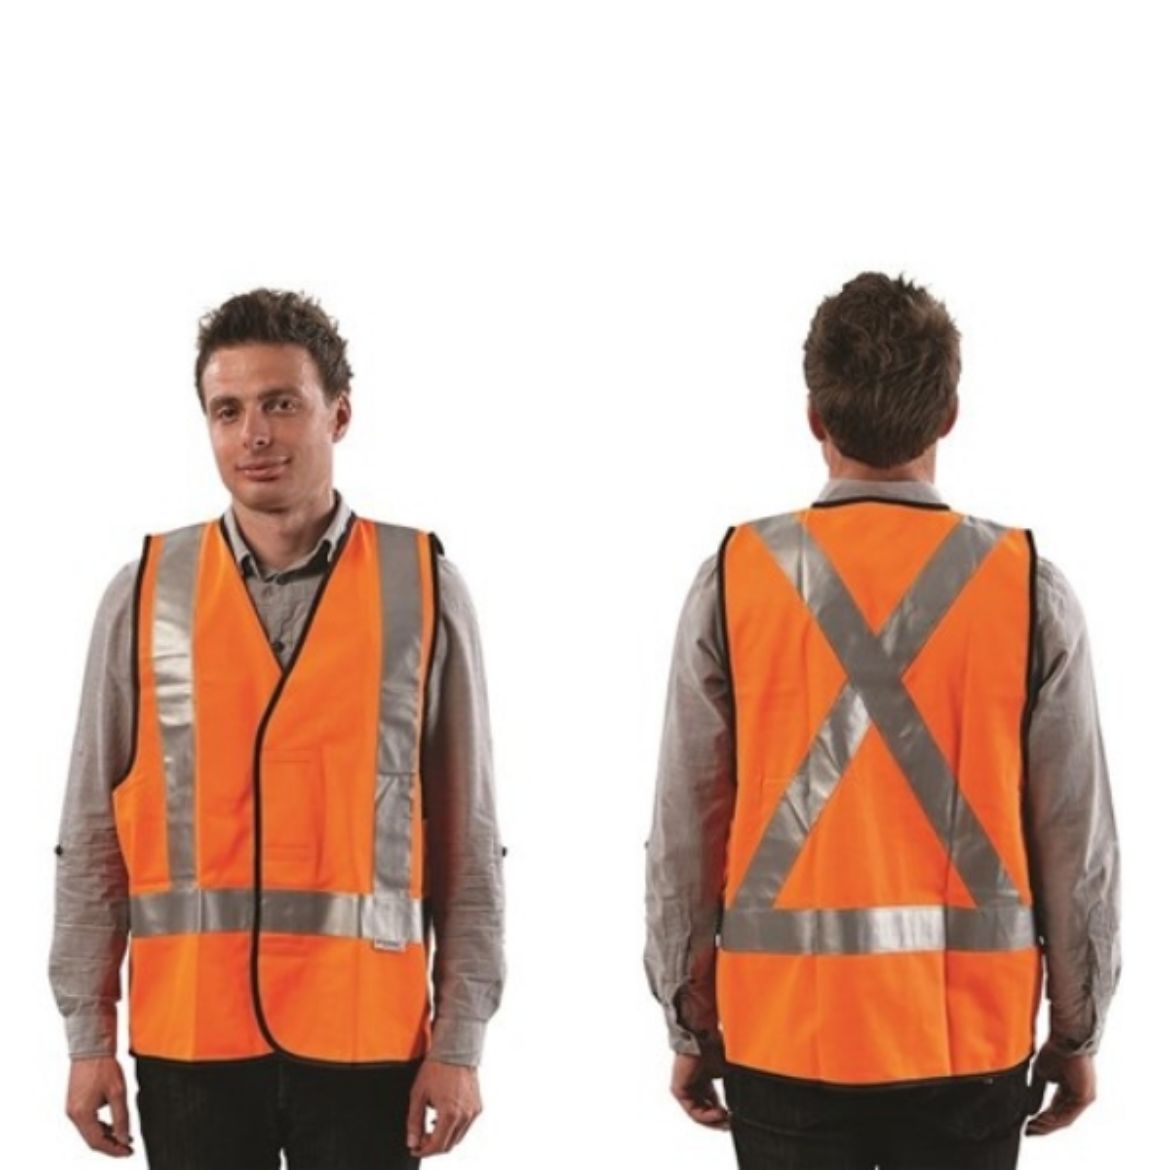 Picture of ORANGE VEST DAY/NIGHT USE VEST WITH X BACK PATTERN REFLECTIVE TAPE. AVAILABLE IN SIZES S/M/L/XL/2XL/3XL/4XL